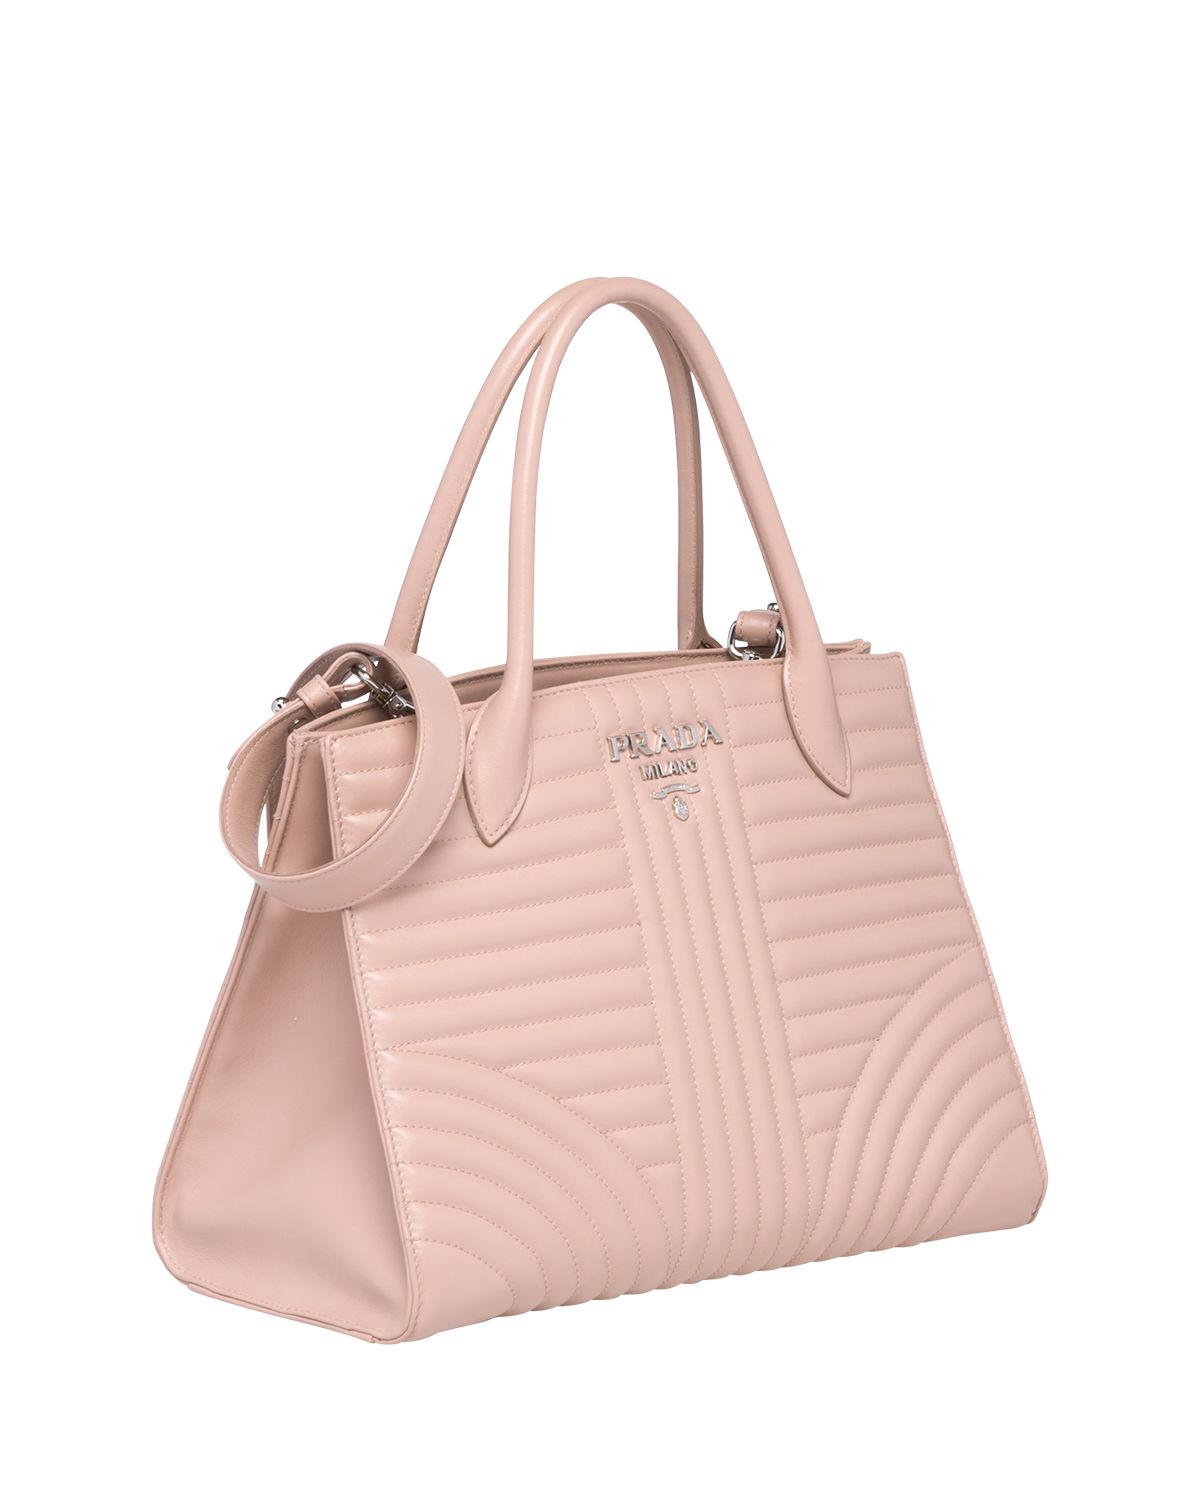 Prada Diagramme Tote With Removable Crossbody Strap - Lyst